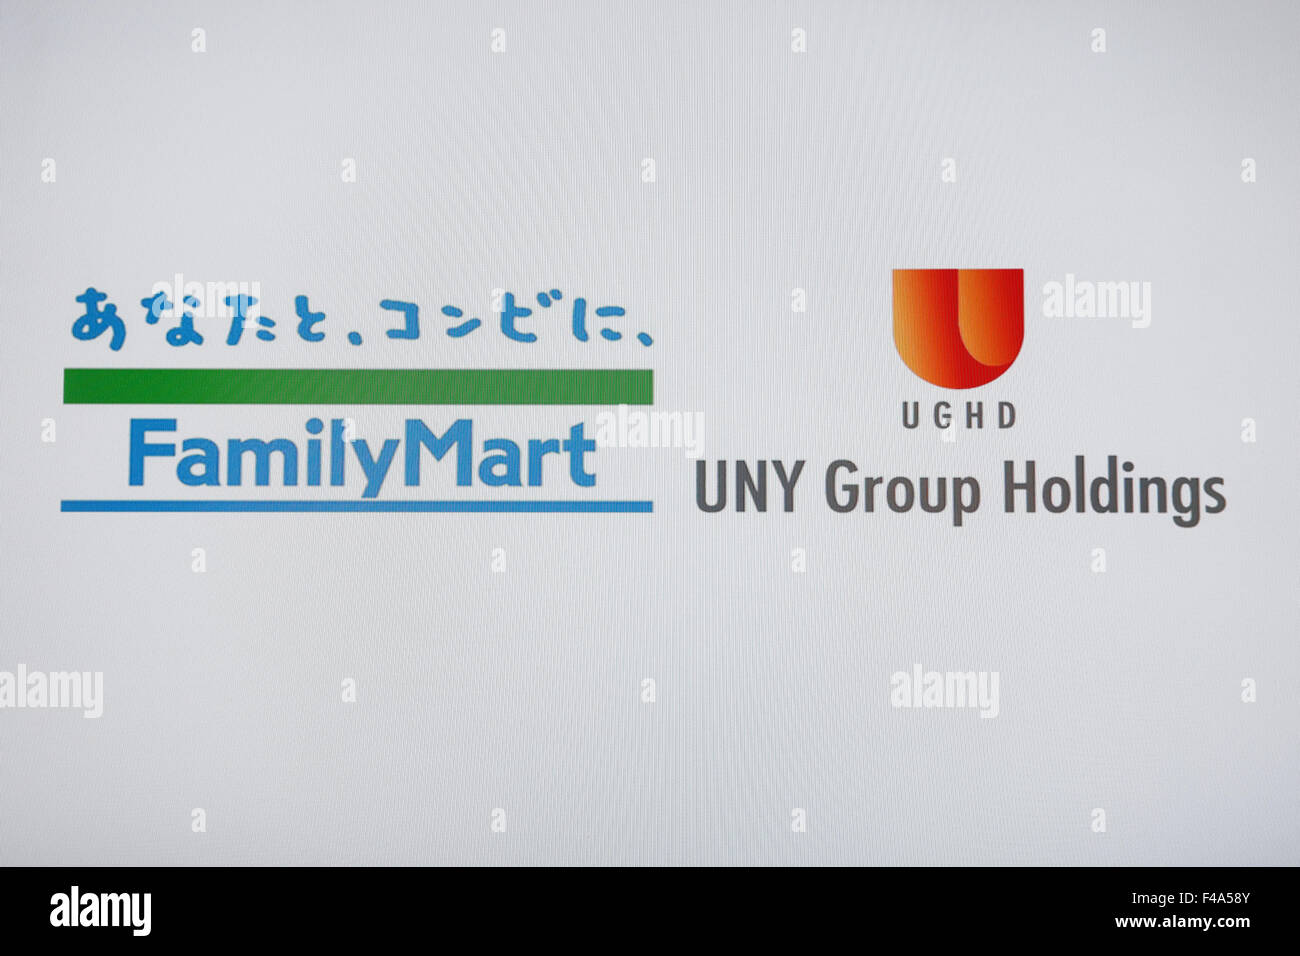 Familymart Co And Uny Group Holdings Co Announced On Thursday 15th Stock Photo Alamy